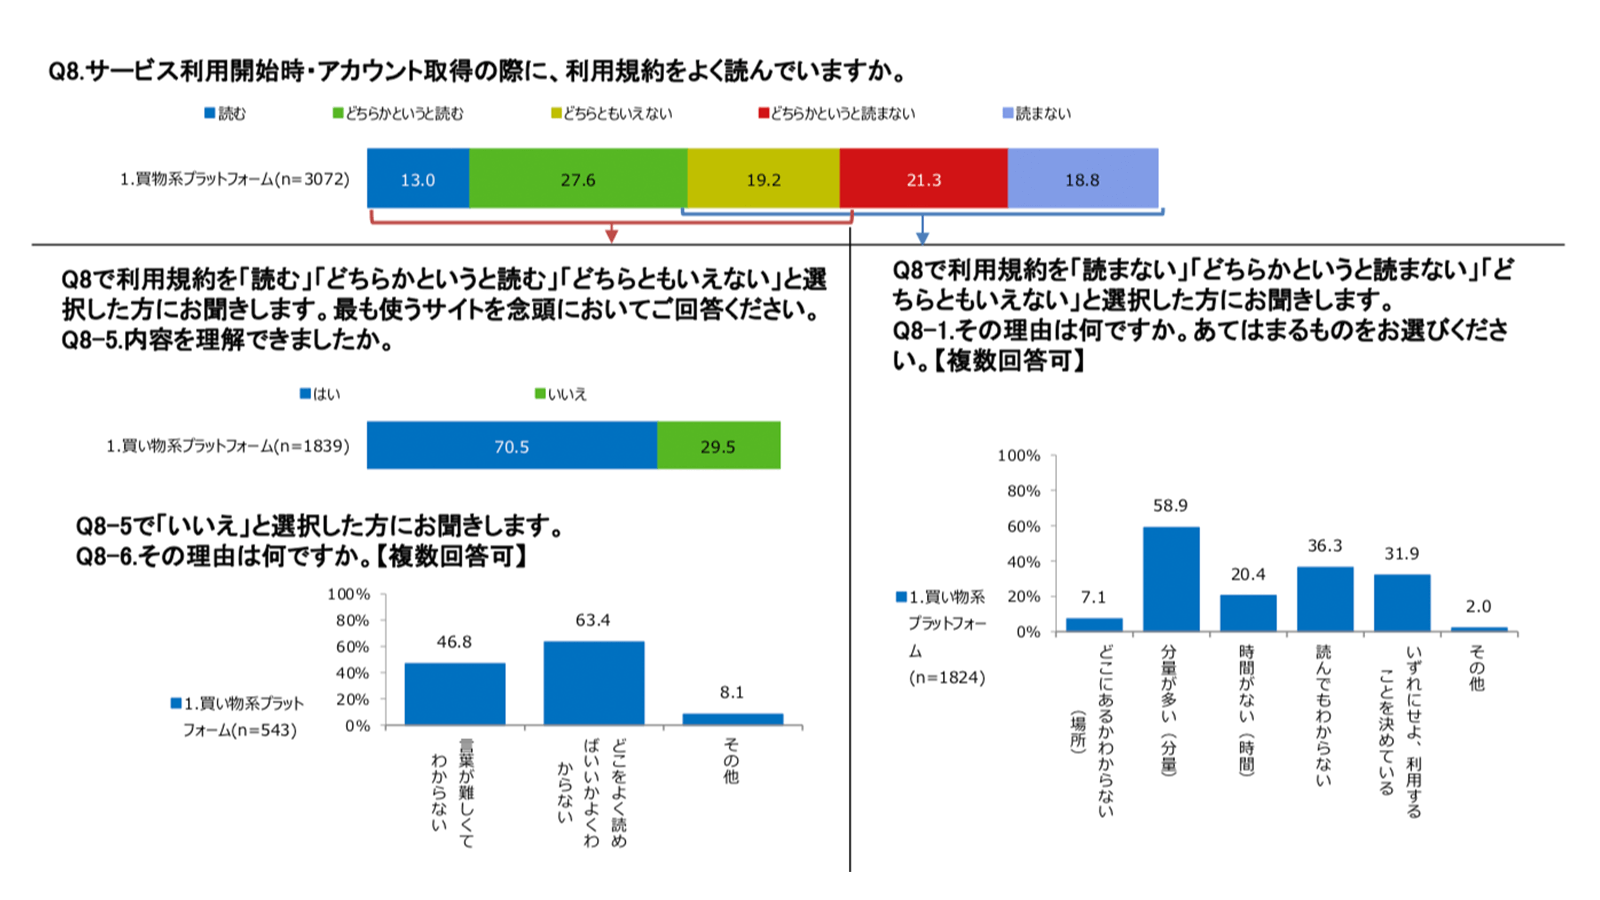 https://www.caa.go.jp/about_us/about/plans_and_status/digital_platform/pdf/consumer_system_cms101_200520_05.pdf 2020年6月9日最終アクセス